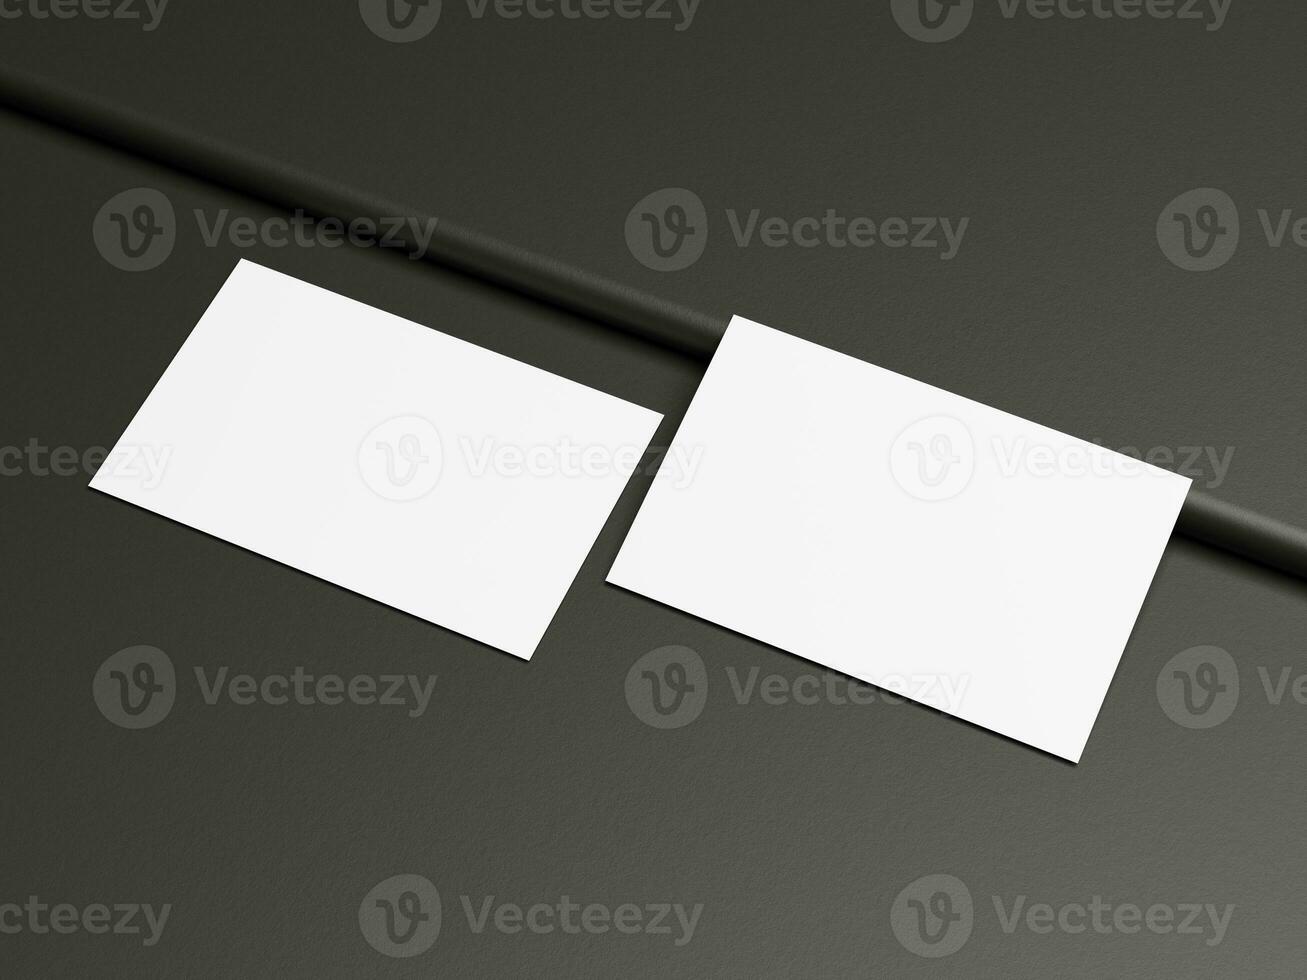 Business card on black background photo